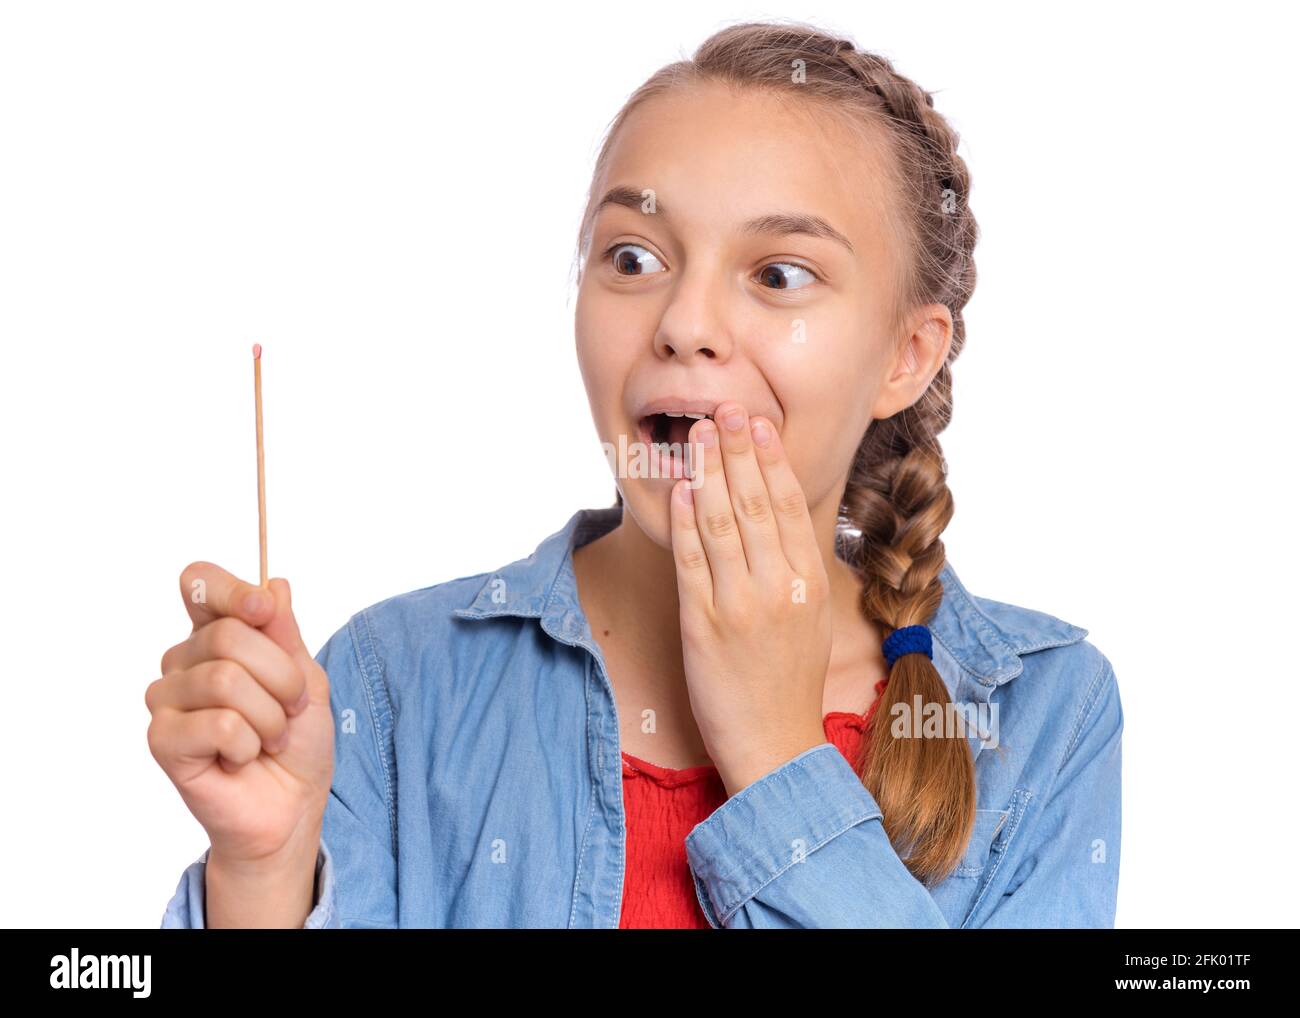 Teen girl holding big match, isolated on white background. Smiling child plays with matches. Fire dangerous concept Stock Photo